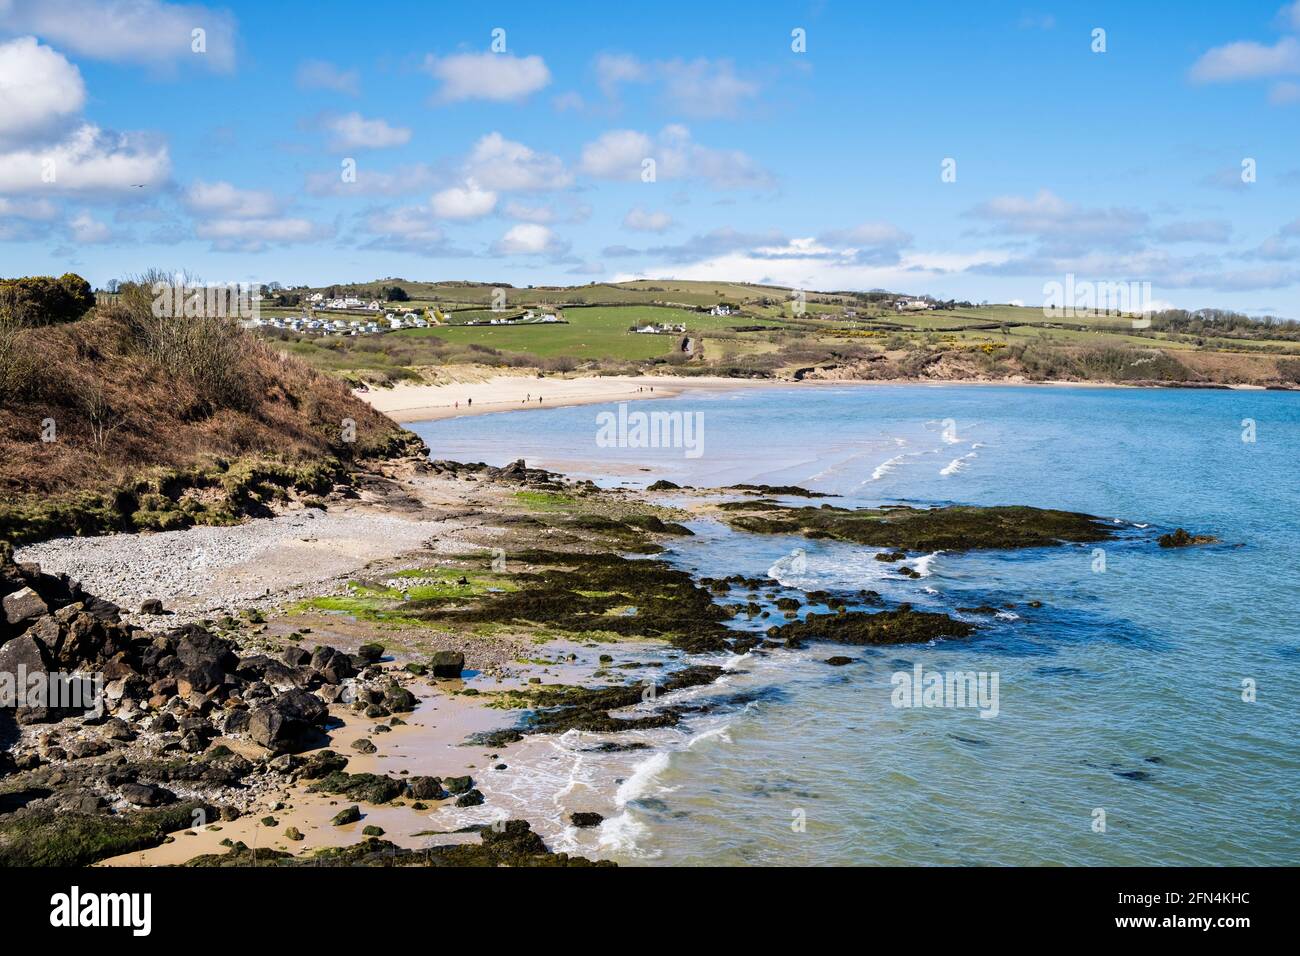 High view across rocky coast and bay to beach from coastal path. Lligwy, Isle of Anglesey, north Wales, UK, Britain Stock Photo